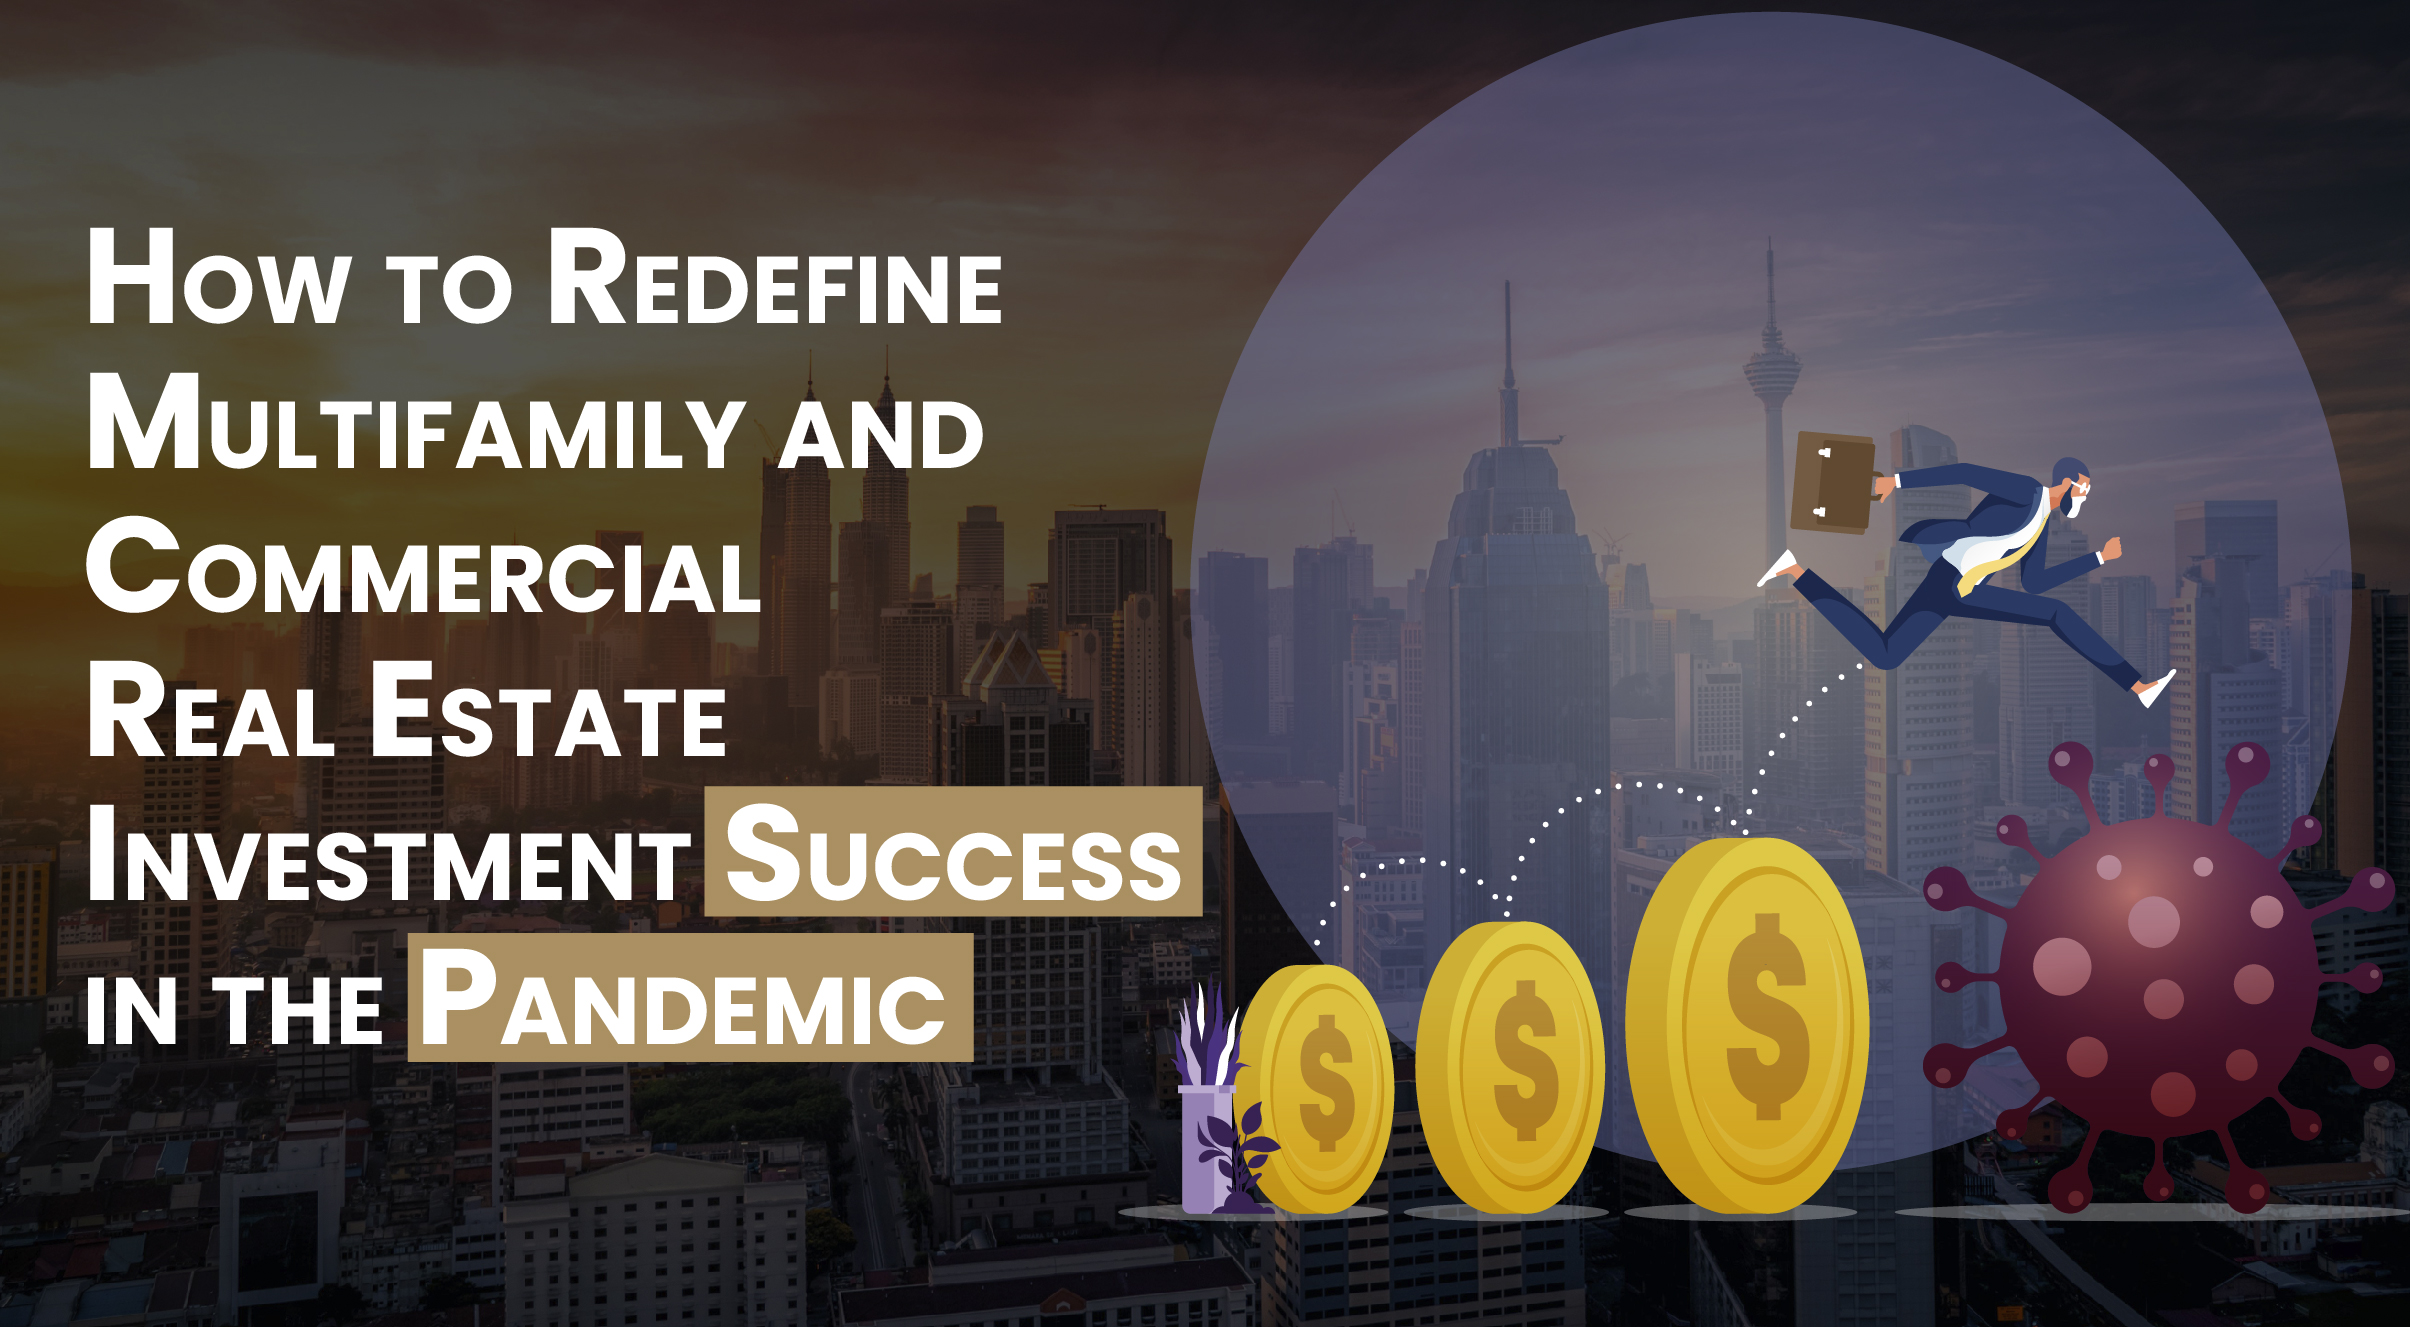 How to Redefine Multifamily and Commercial Real Estate Investment Success in the Pandemic